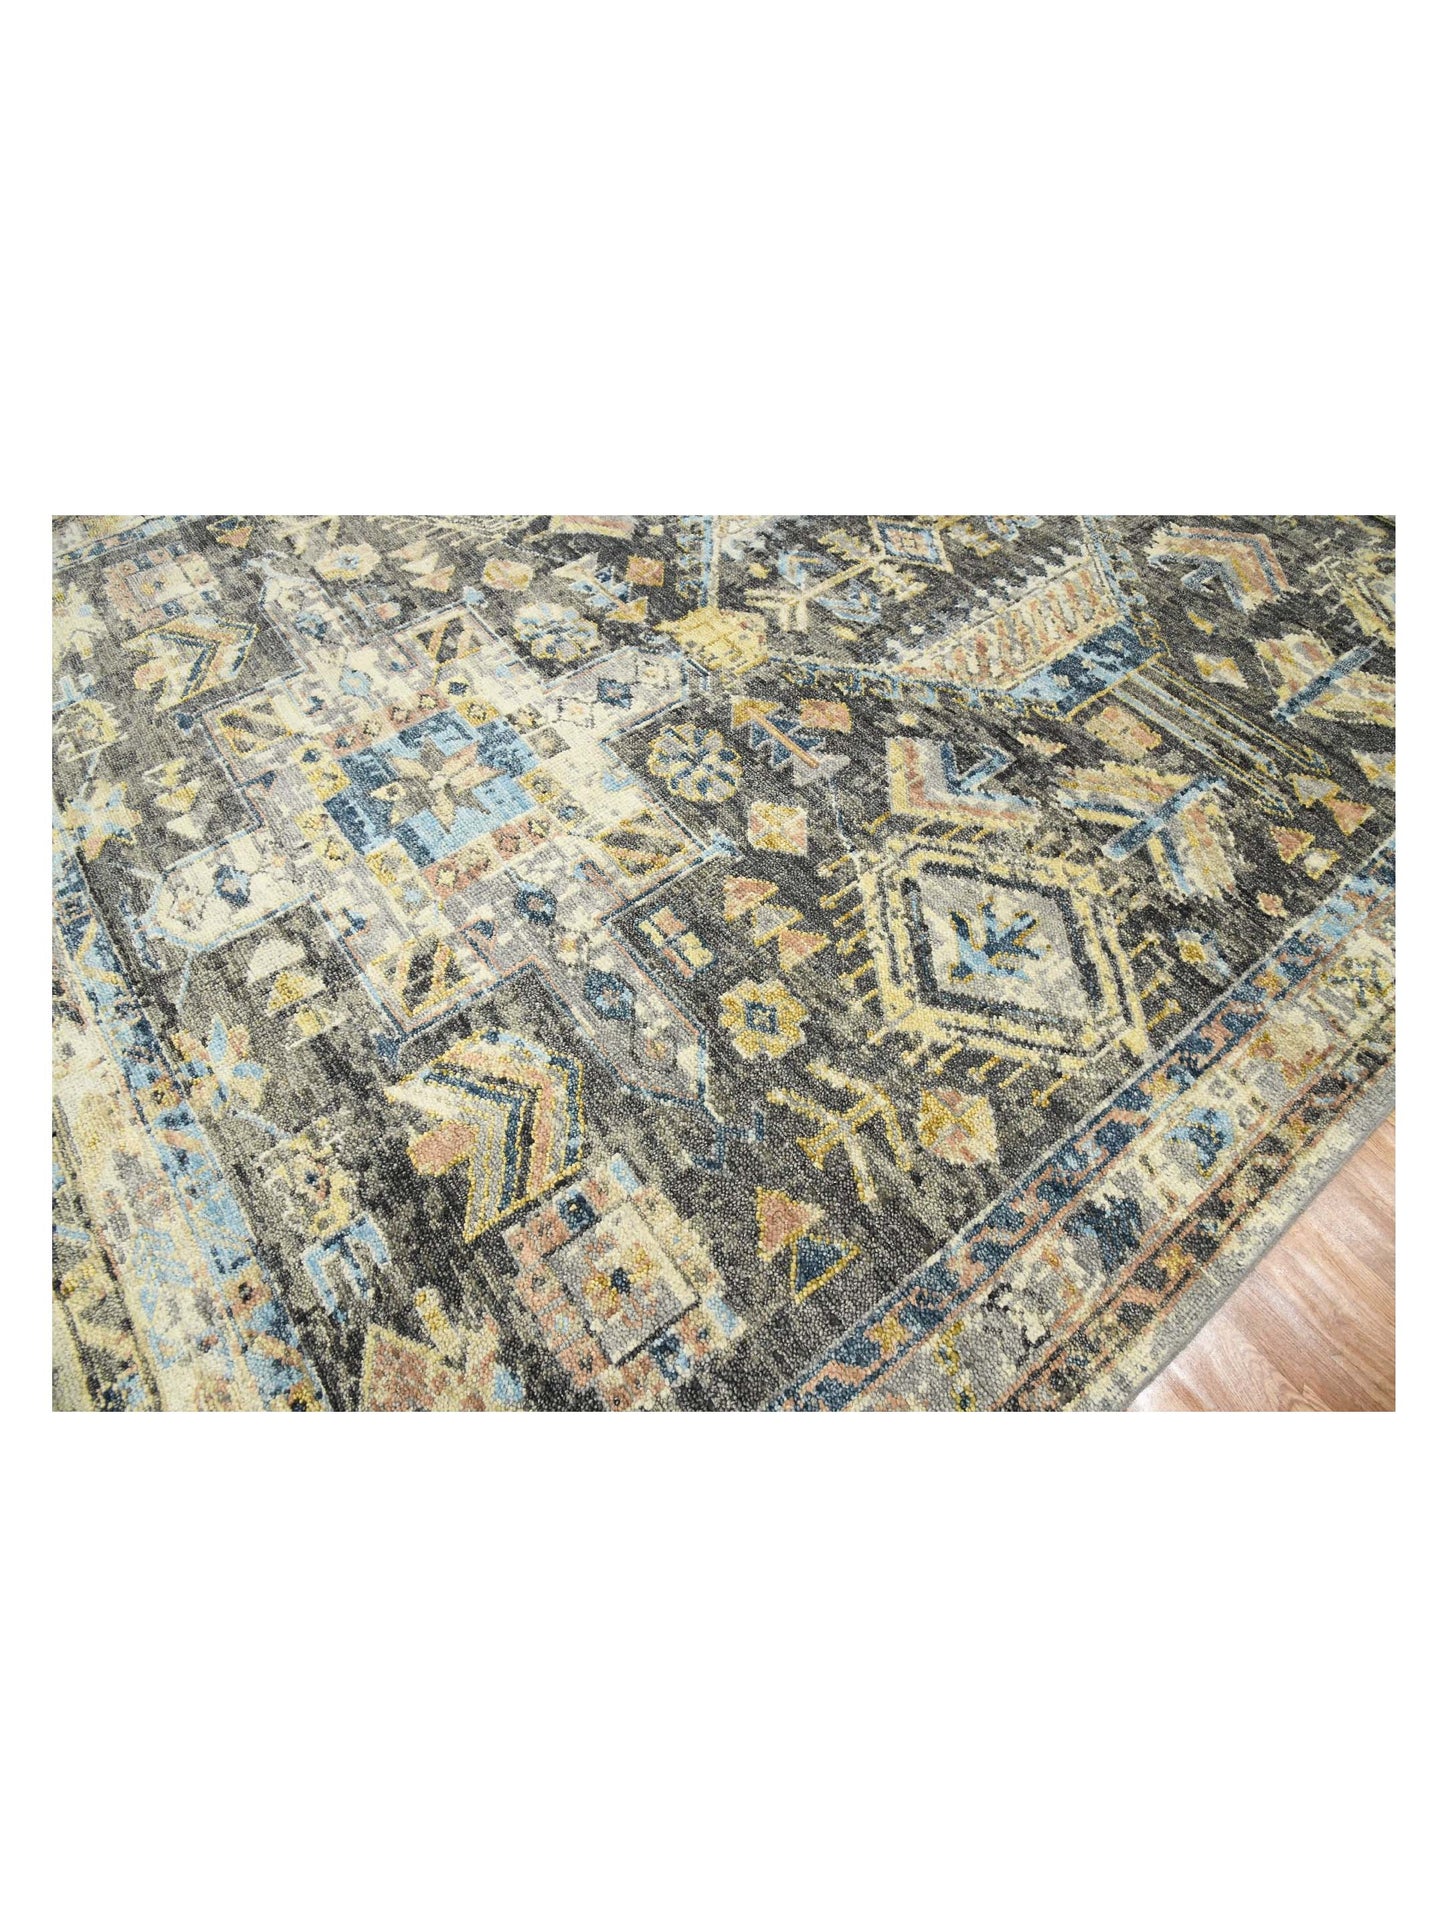 Limited Woodburn WOD-553 GRAY  Traditional Knotted Rug